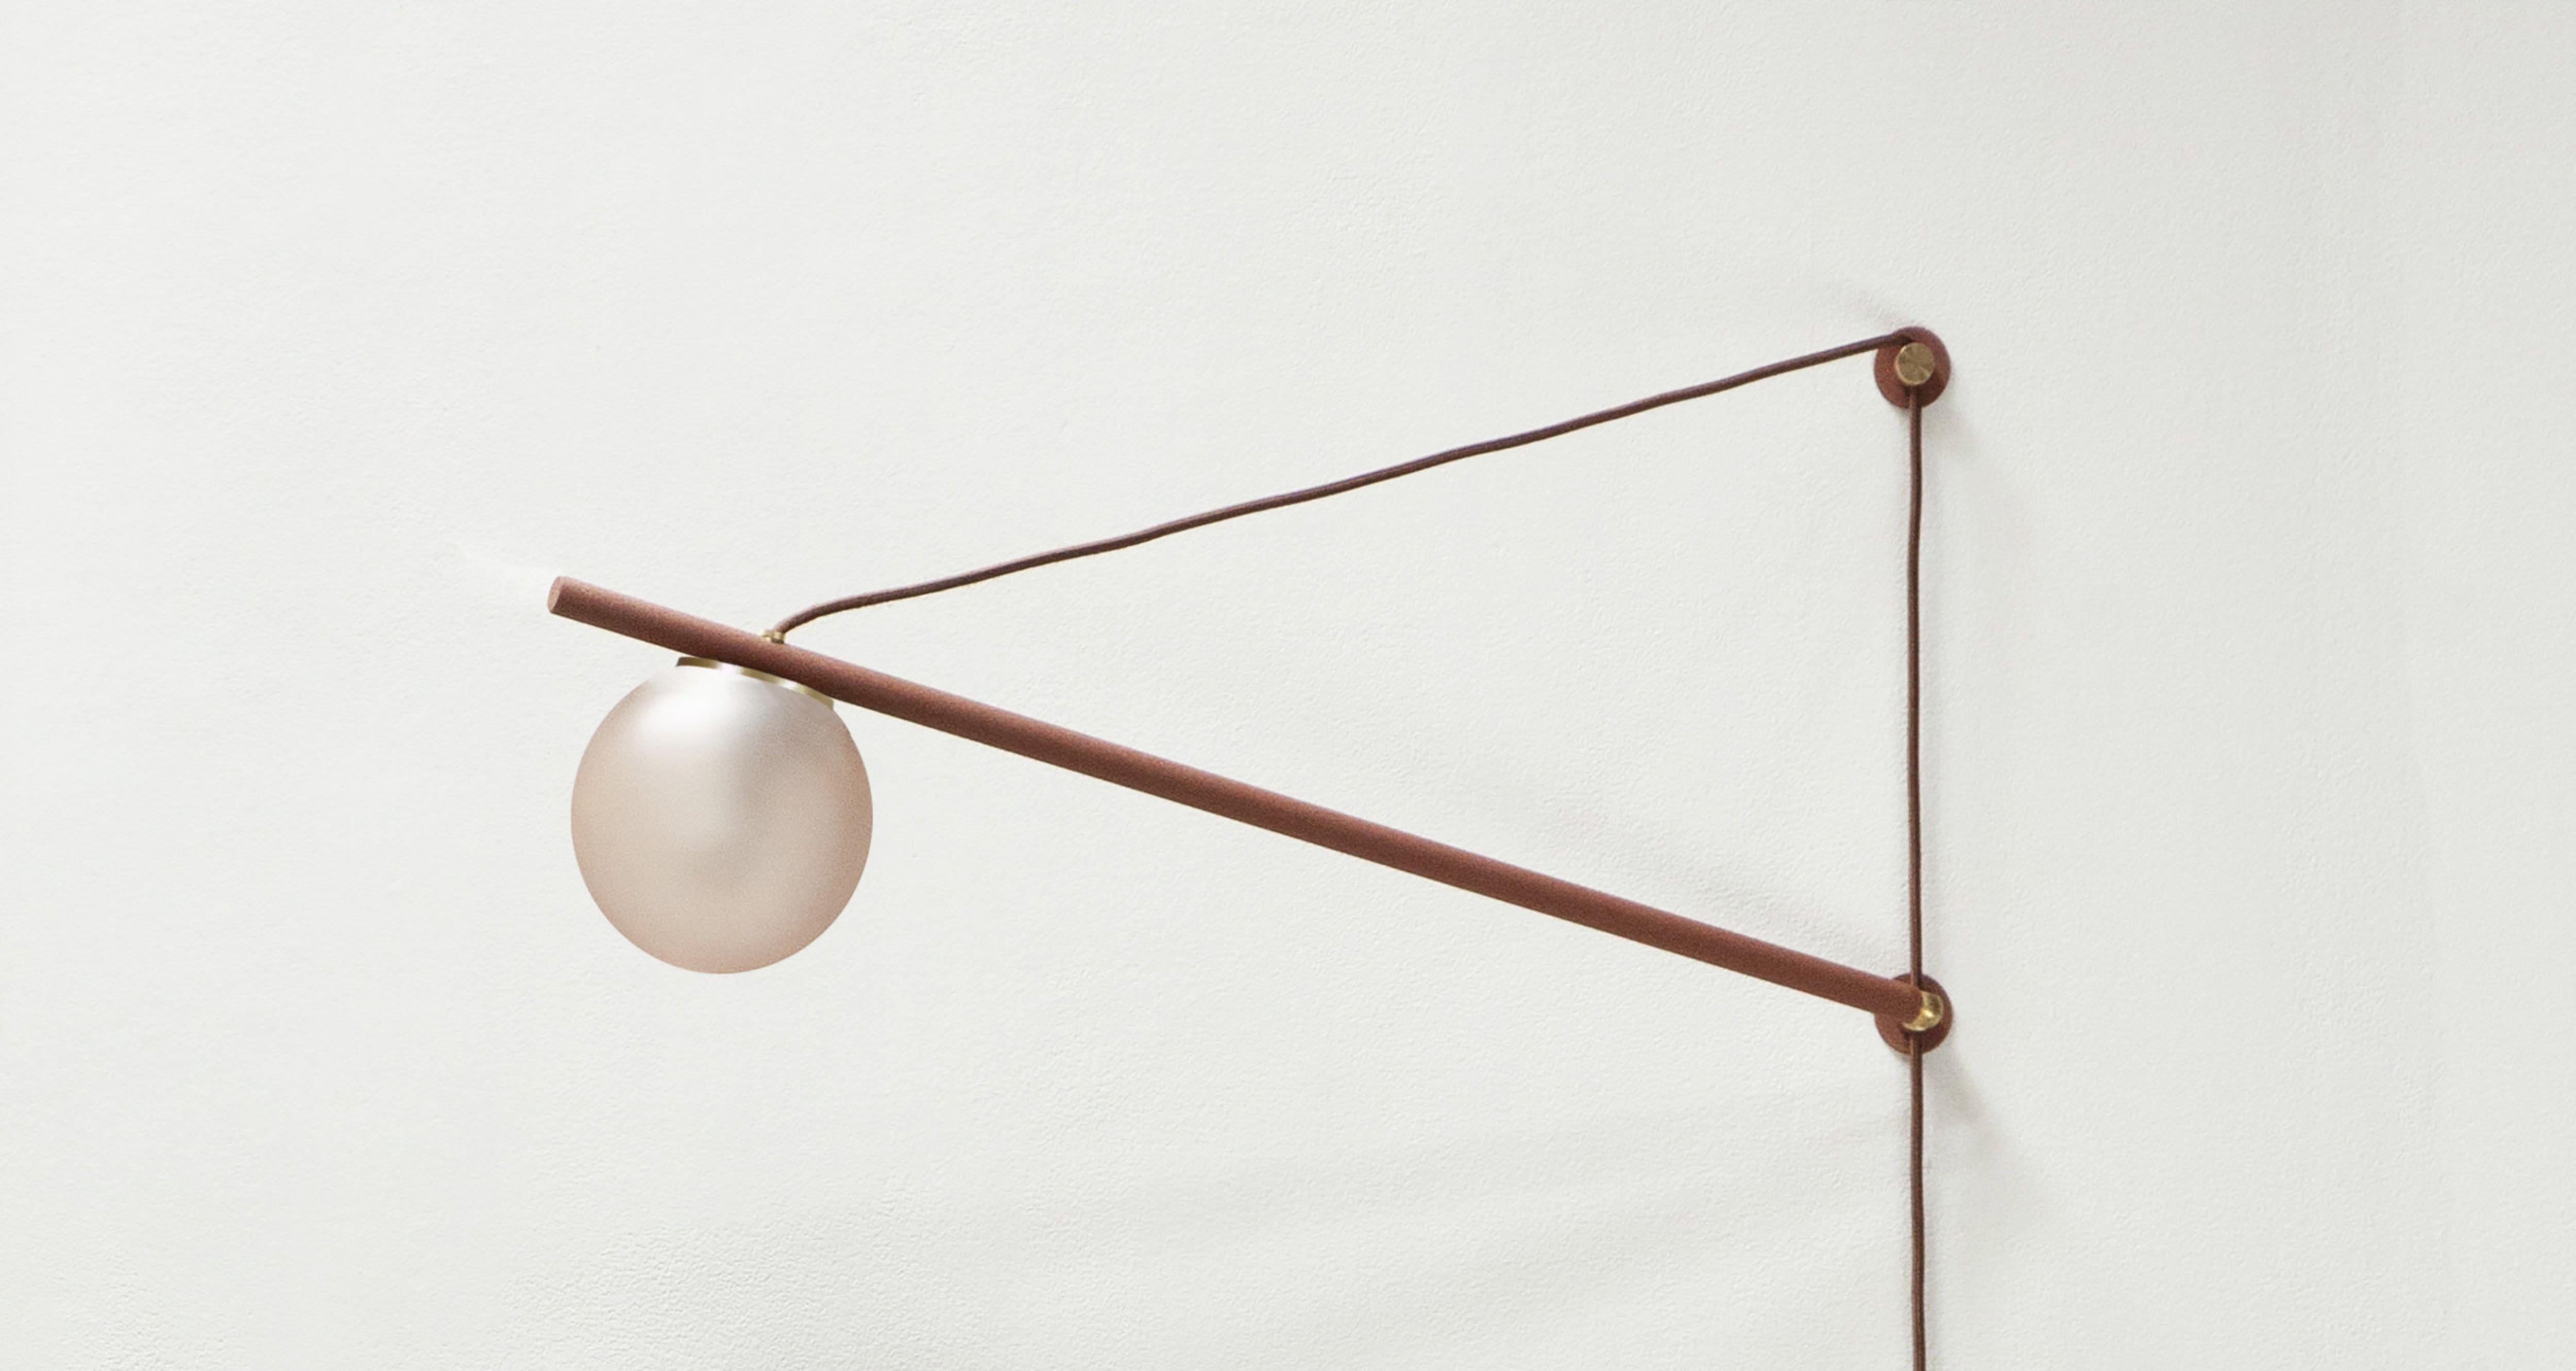 Small ISO sconce light by Ladies & Gentlemen Studio
Dimensions: H 17” x W 30”, 6” globe
Materials: Powder-coated steel (also available in brass), fabric cord, color washed acid etched glass globe. 
Colours: Brushed brass with pine cord, rust, fog